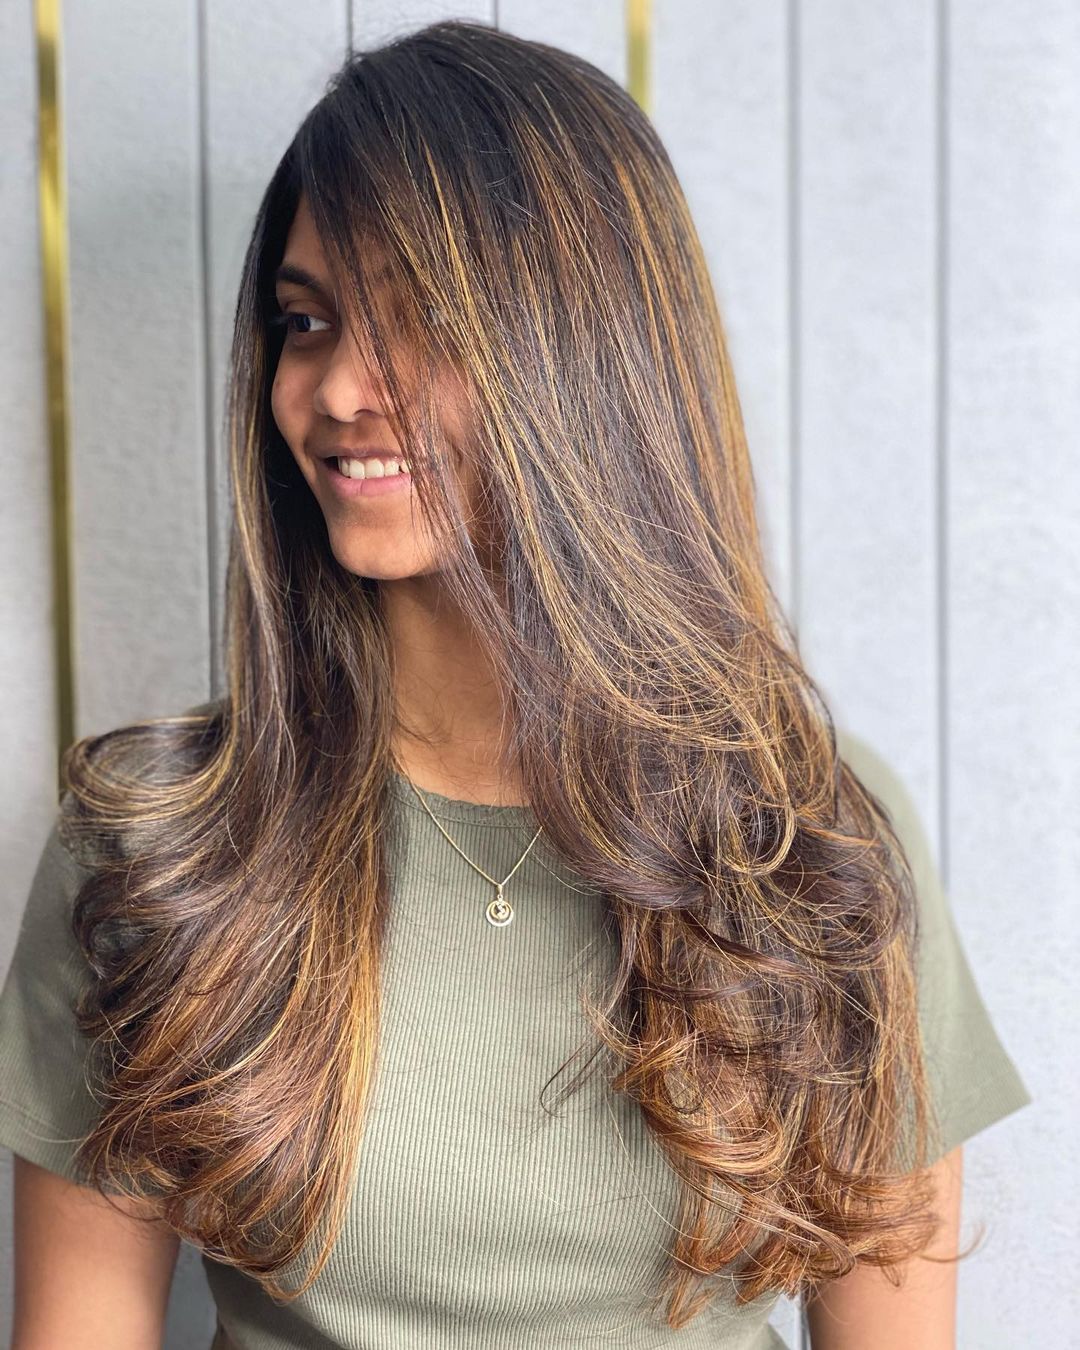 Hair Color for Indian Skin Tone 248 hair care routine | hair color | hair colors for Indian skin tone Hair Color for Indian Skin Tones